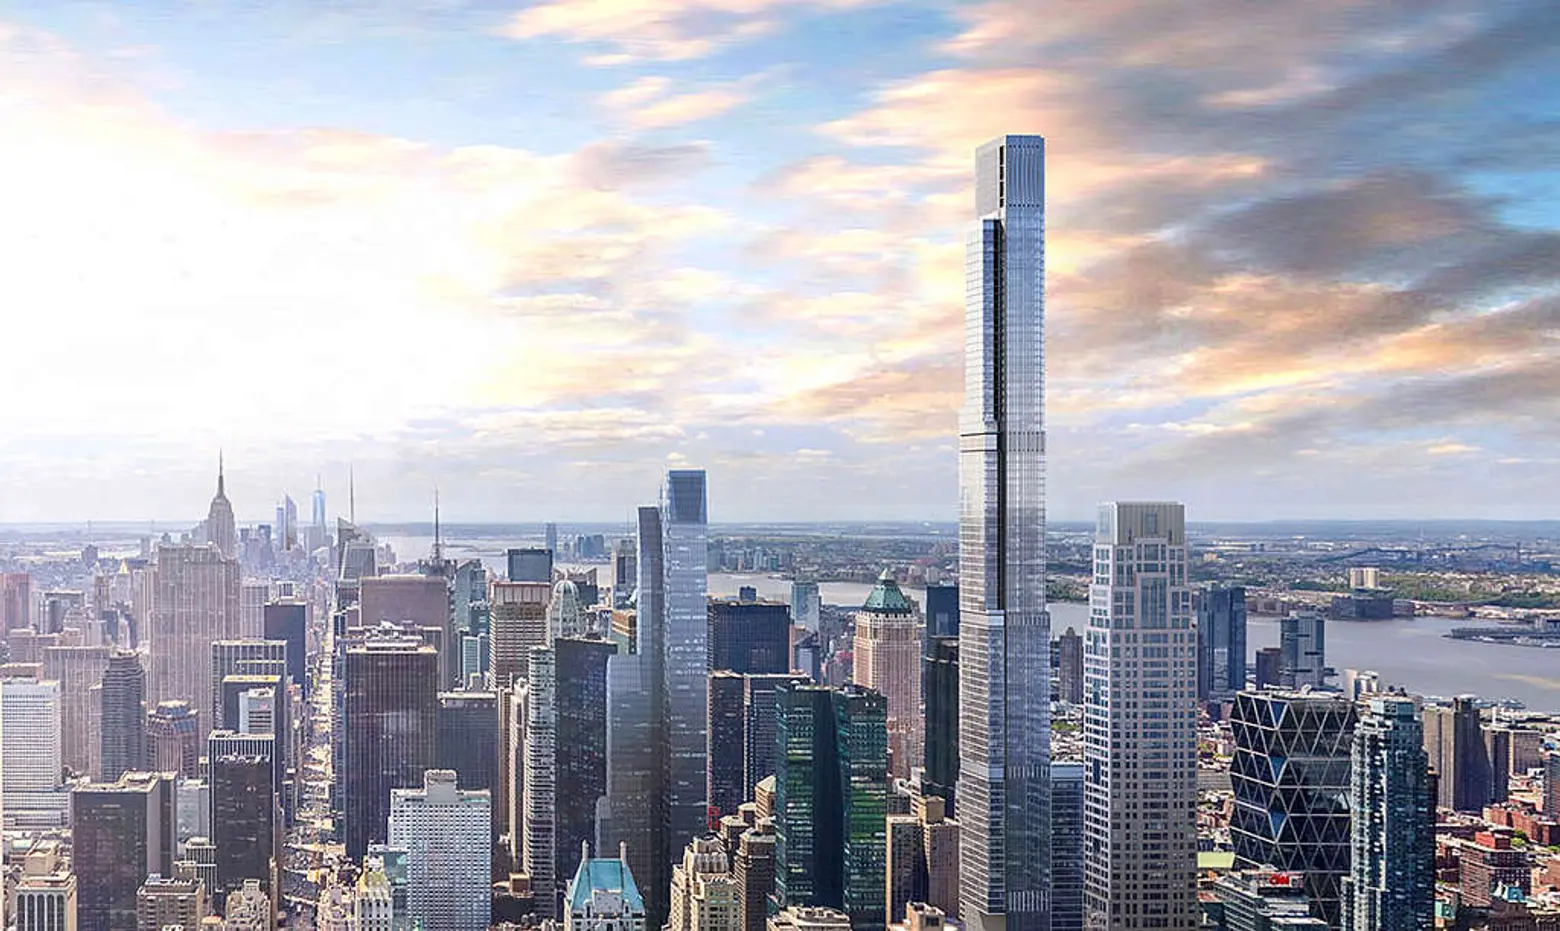 Extell’s Central Park Tower will have a $95M penthouse and 100th-floor ballroom